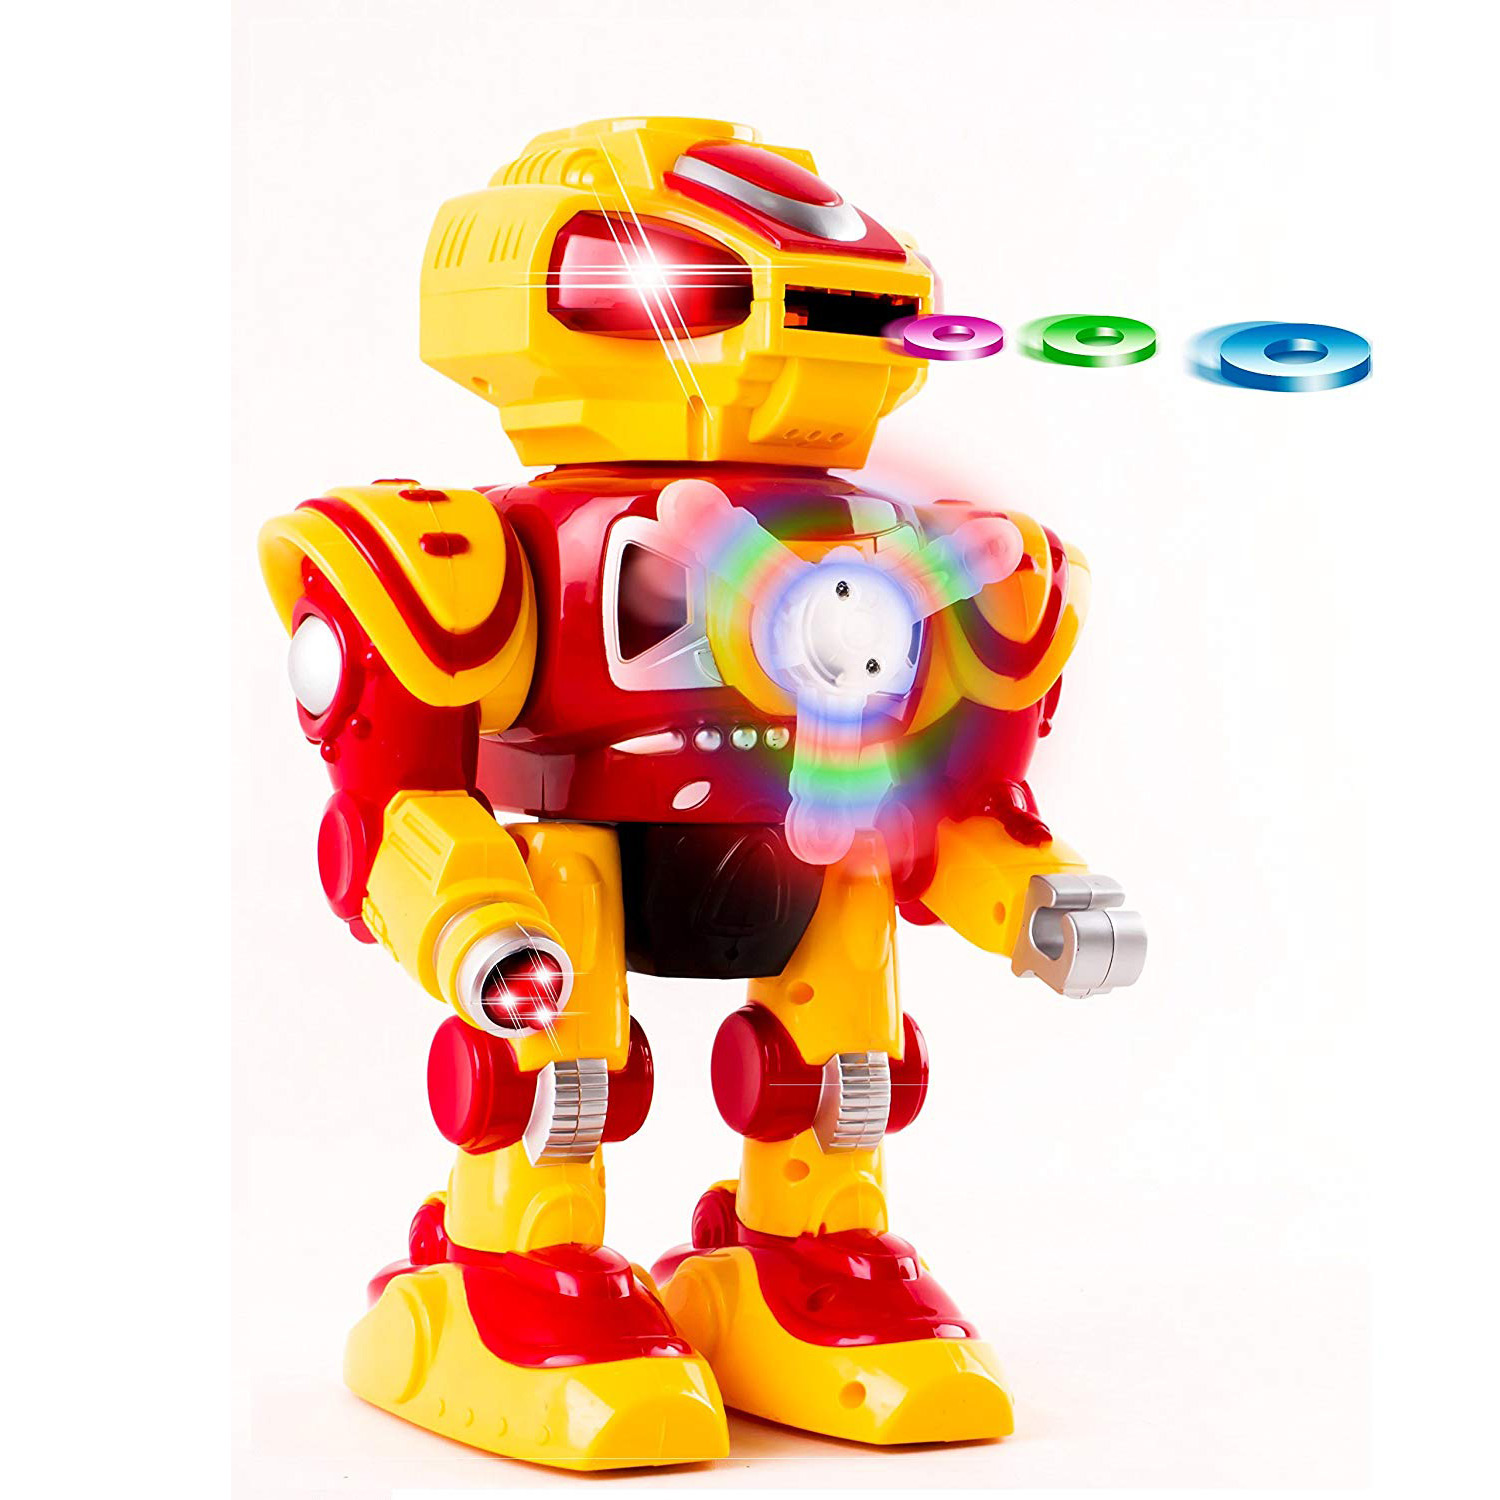 Super Android Toy Robot With Disc Shooting Walking Flashing Lights And Sound Features Great Action Toy For Kids Boys Girls Toddlers Battery Operated Yellow